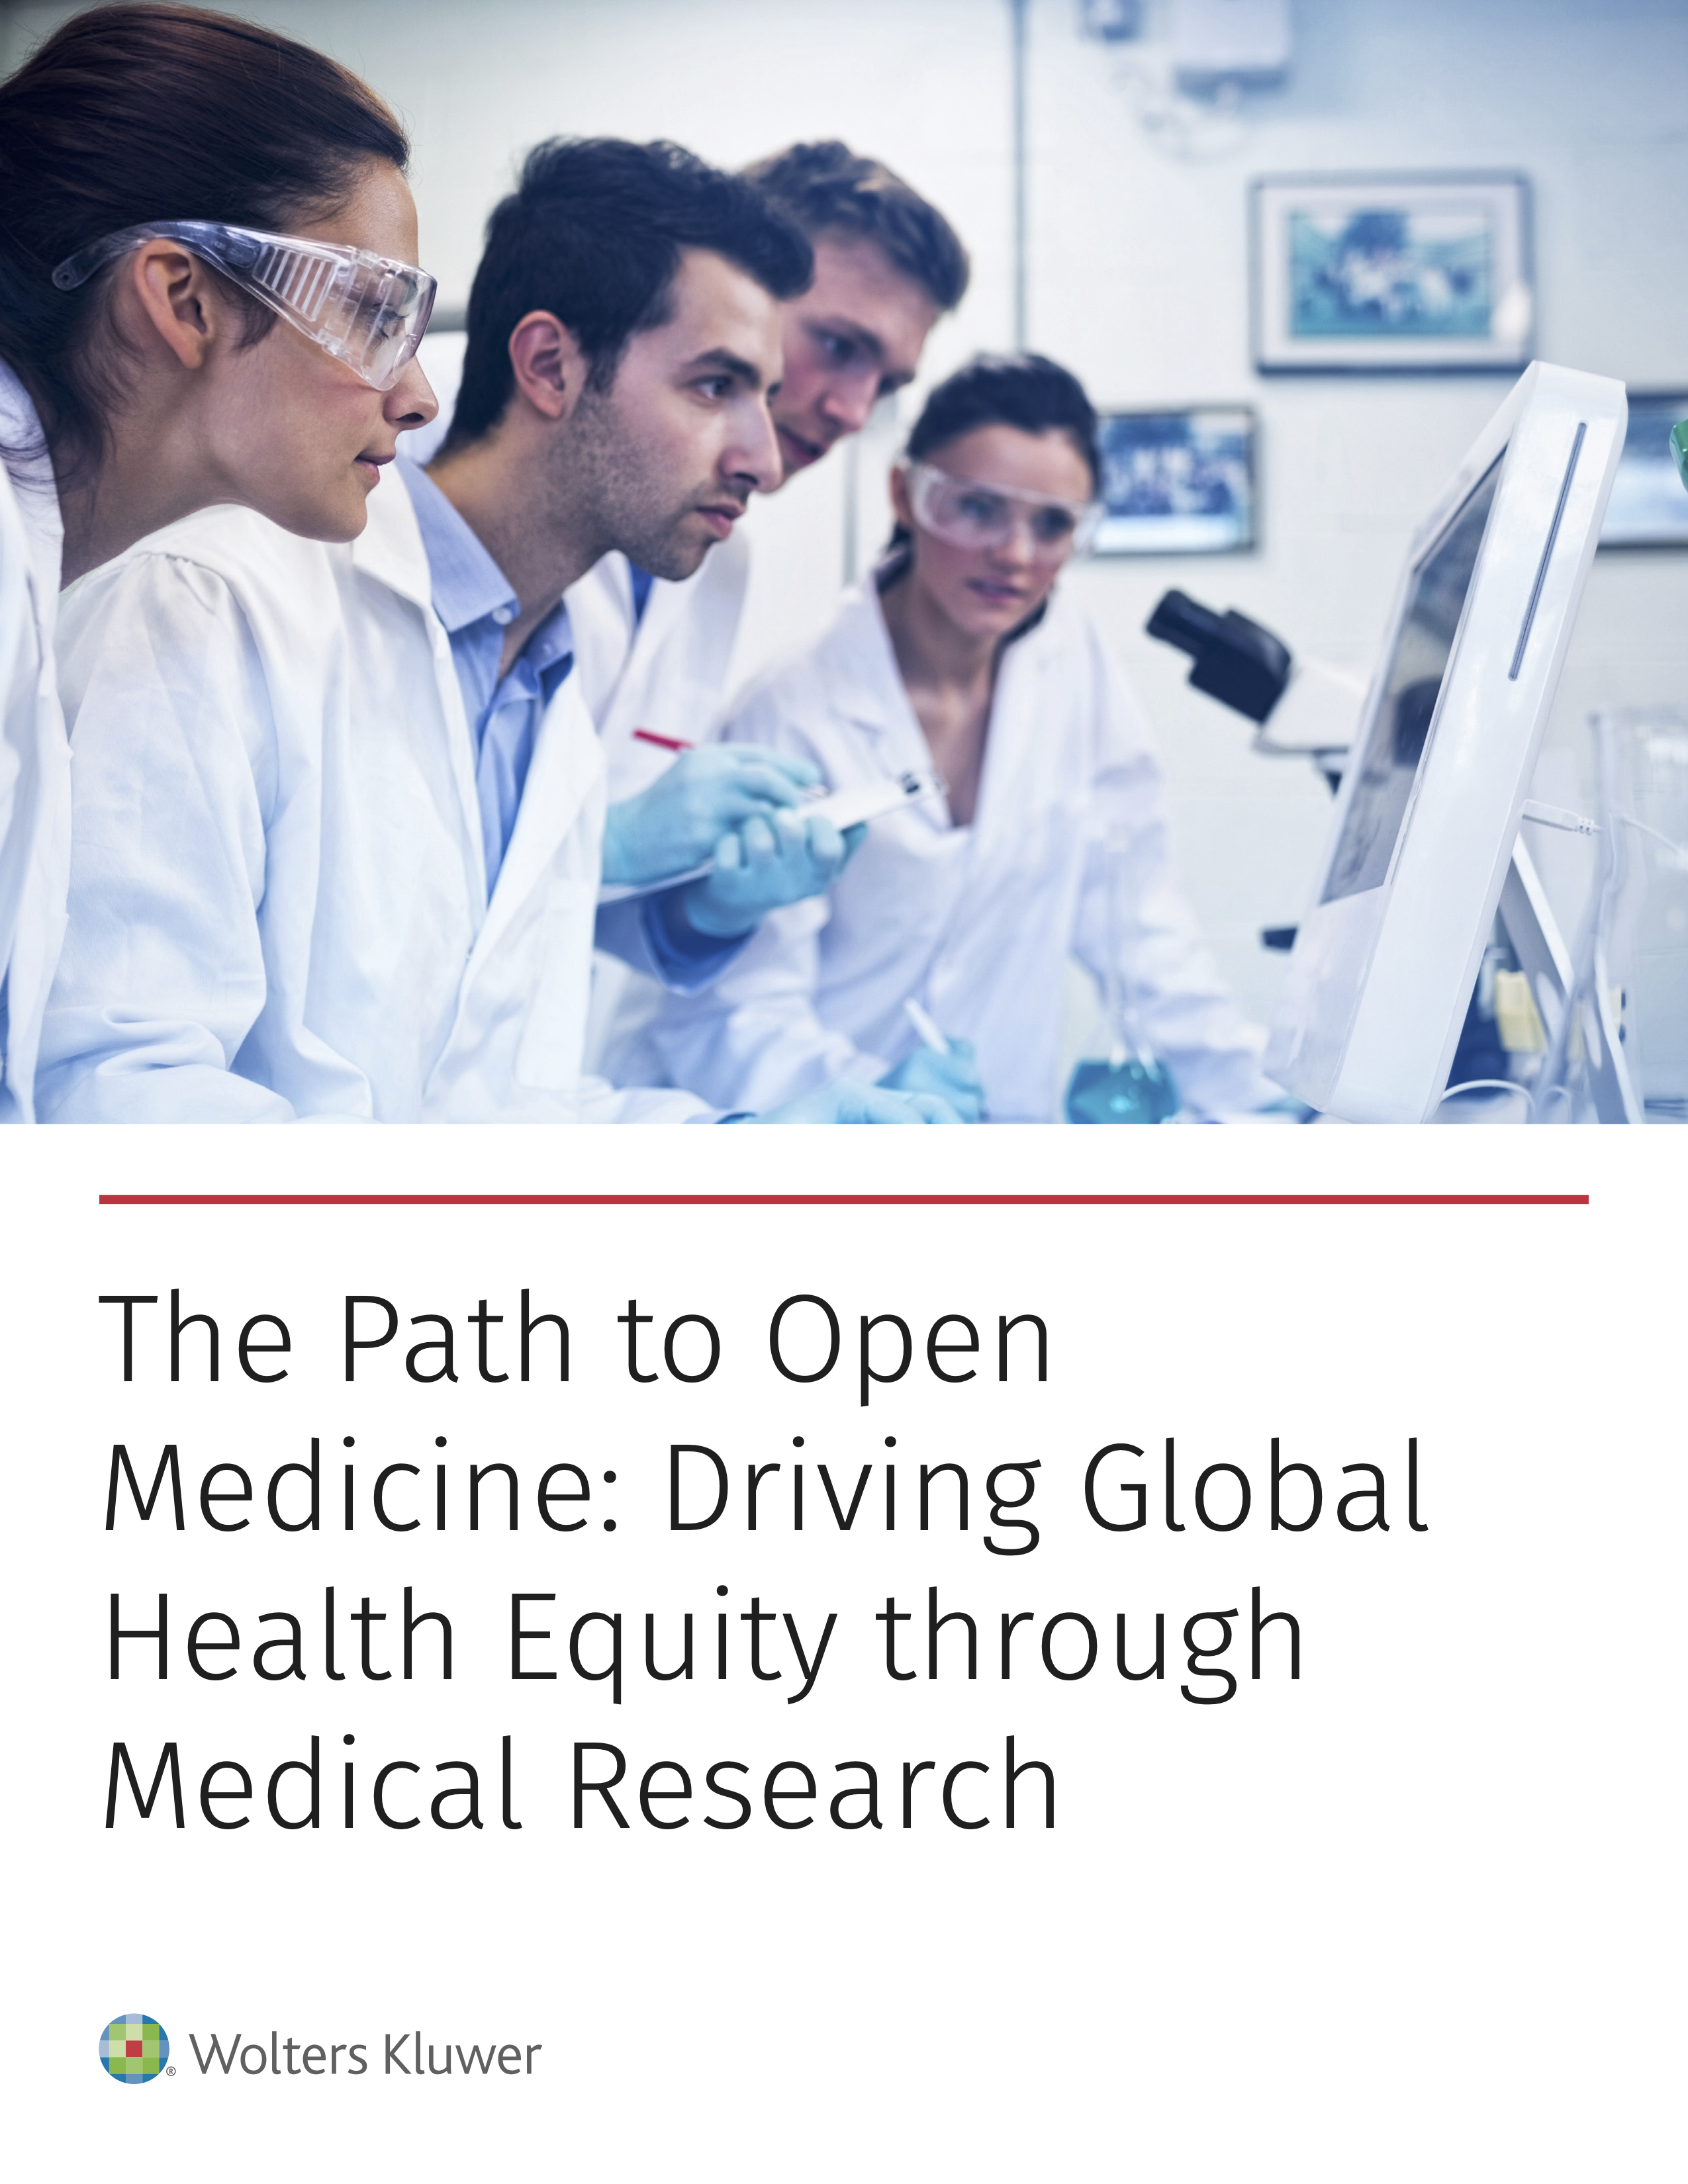 The Path to Open Medicine: Driving Global Health Equity through Medical Research PDF cover